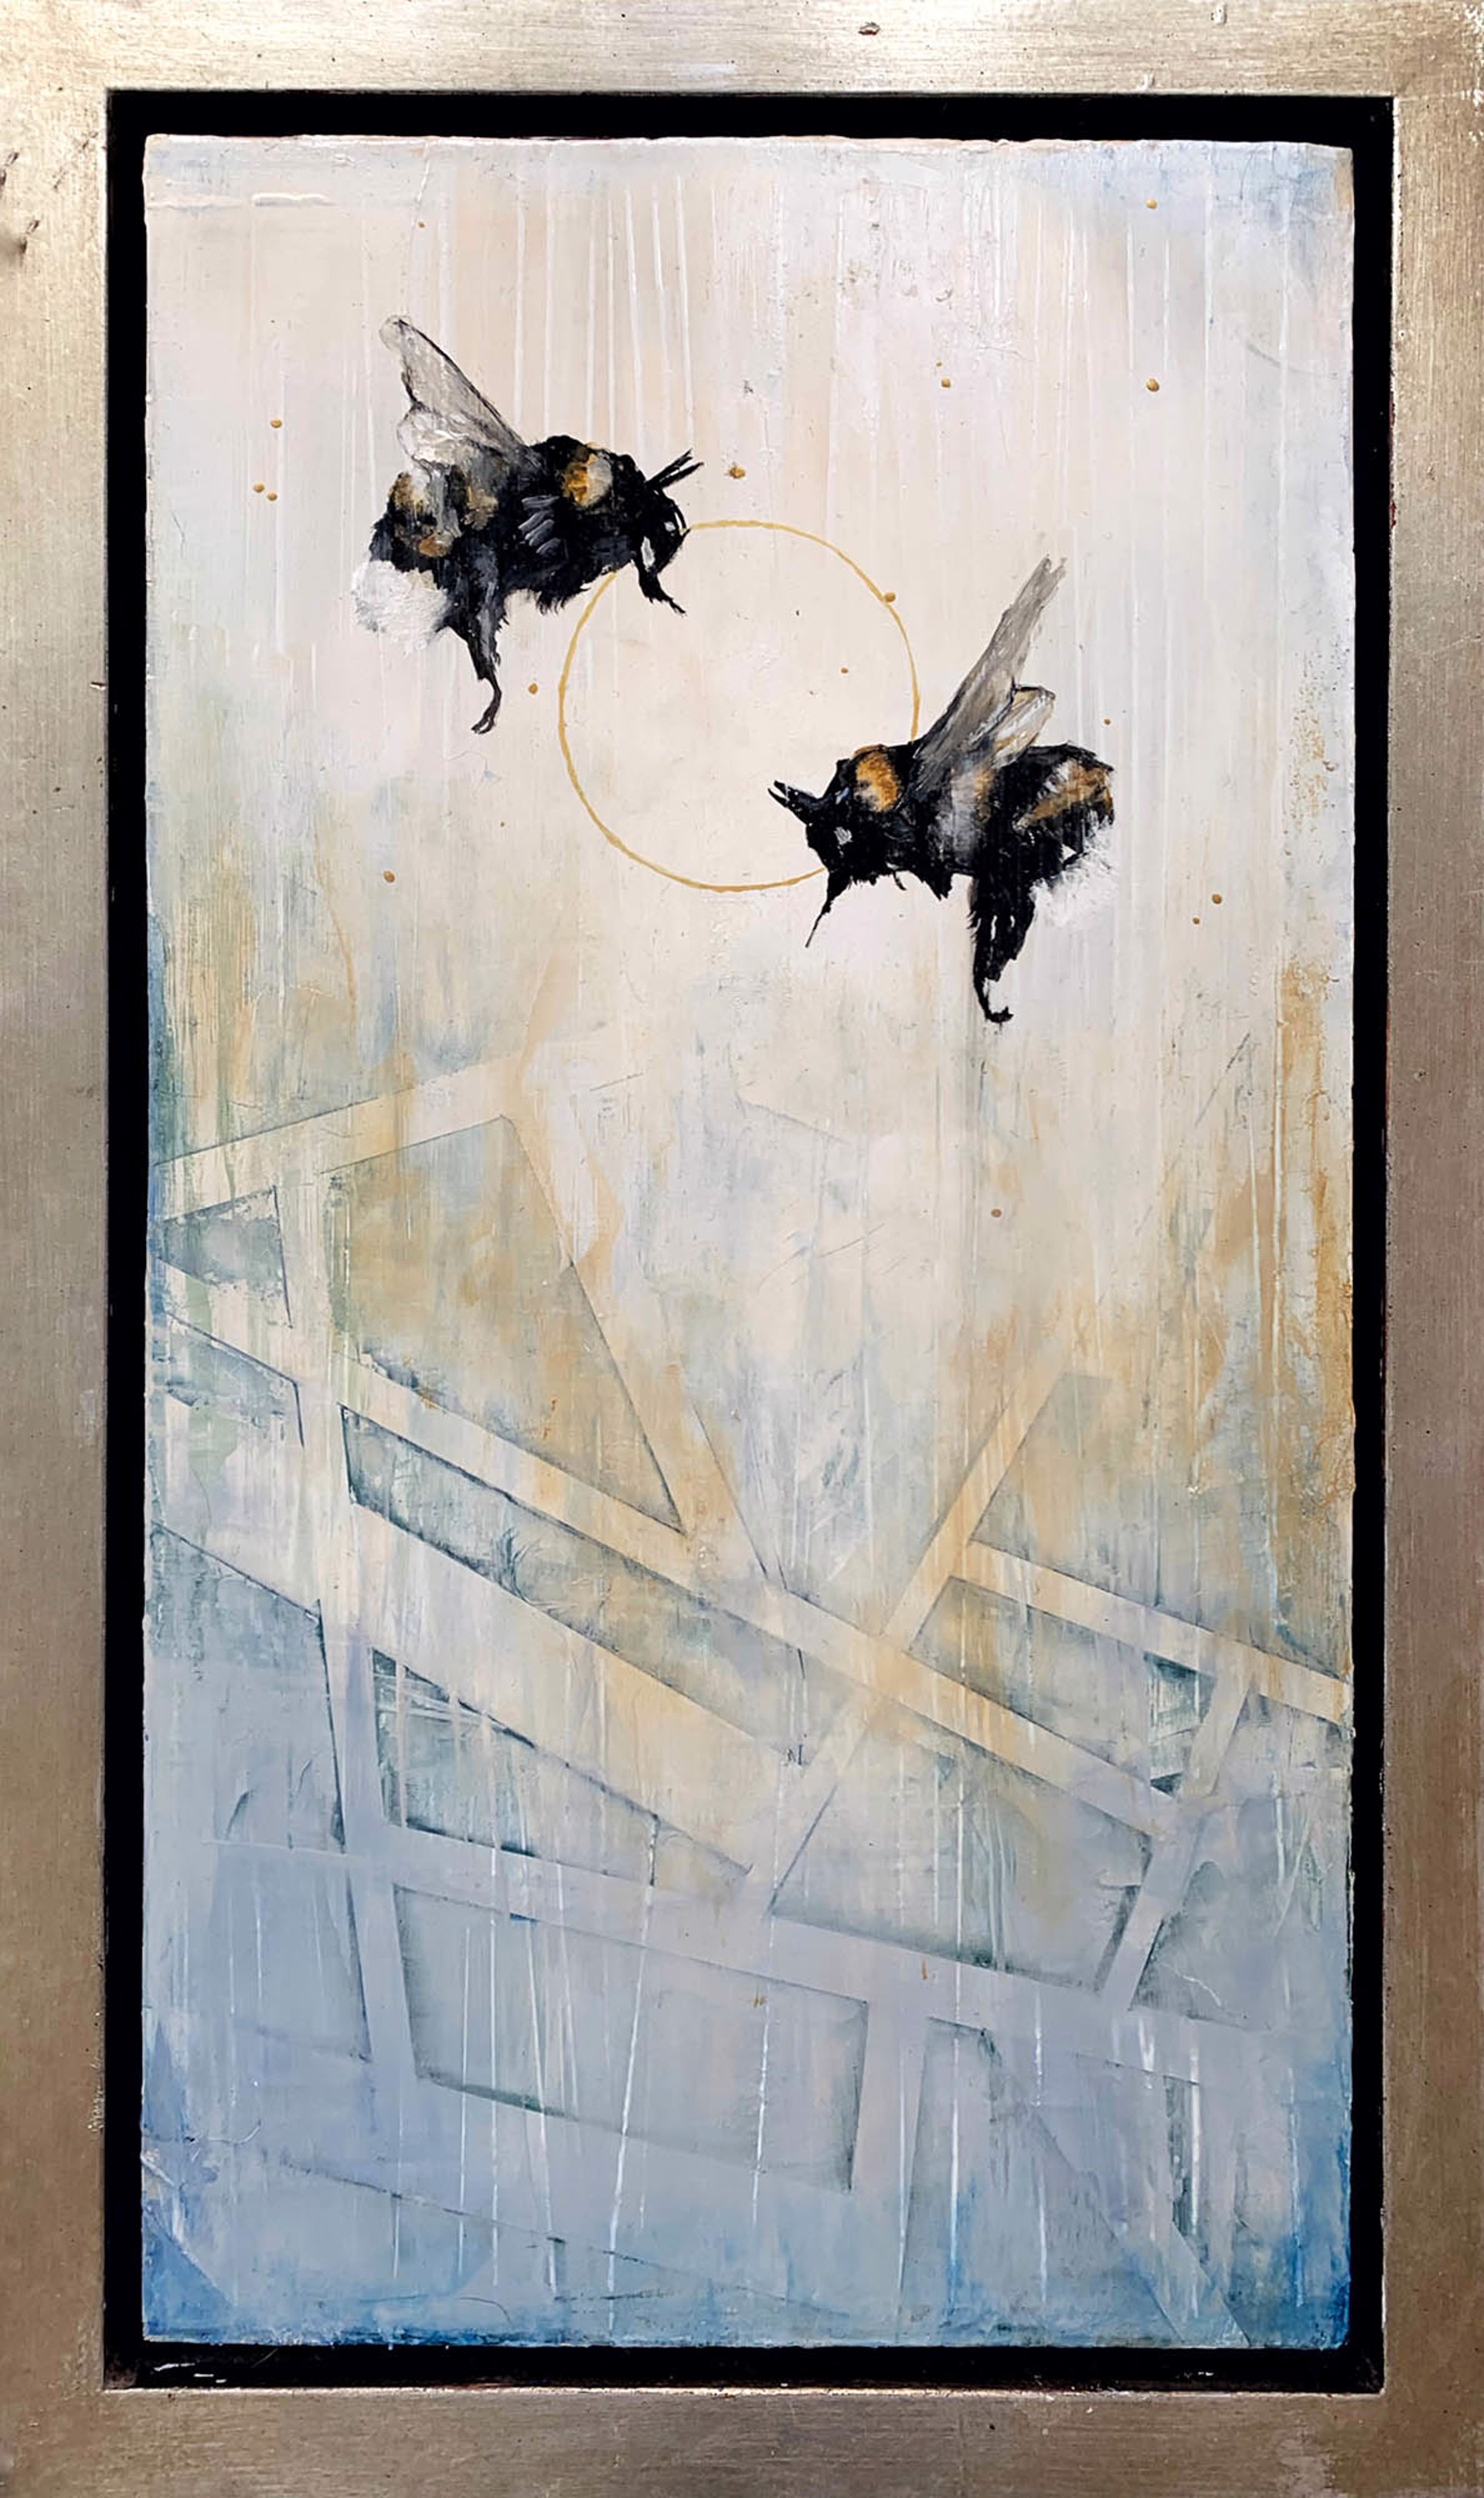 Oil Painting Of Two Bees In Flight With A Contemporary Blue And Yellow Background And Gold Circle